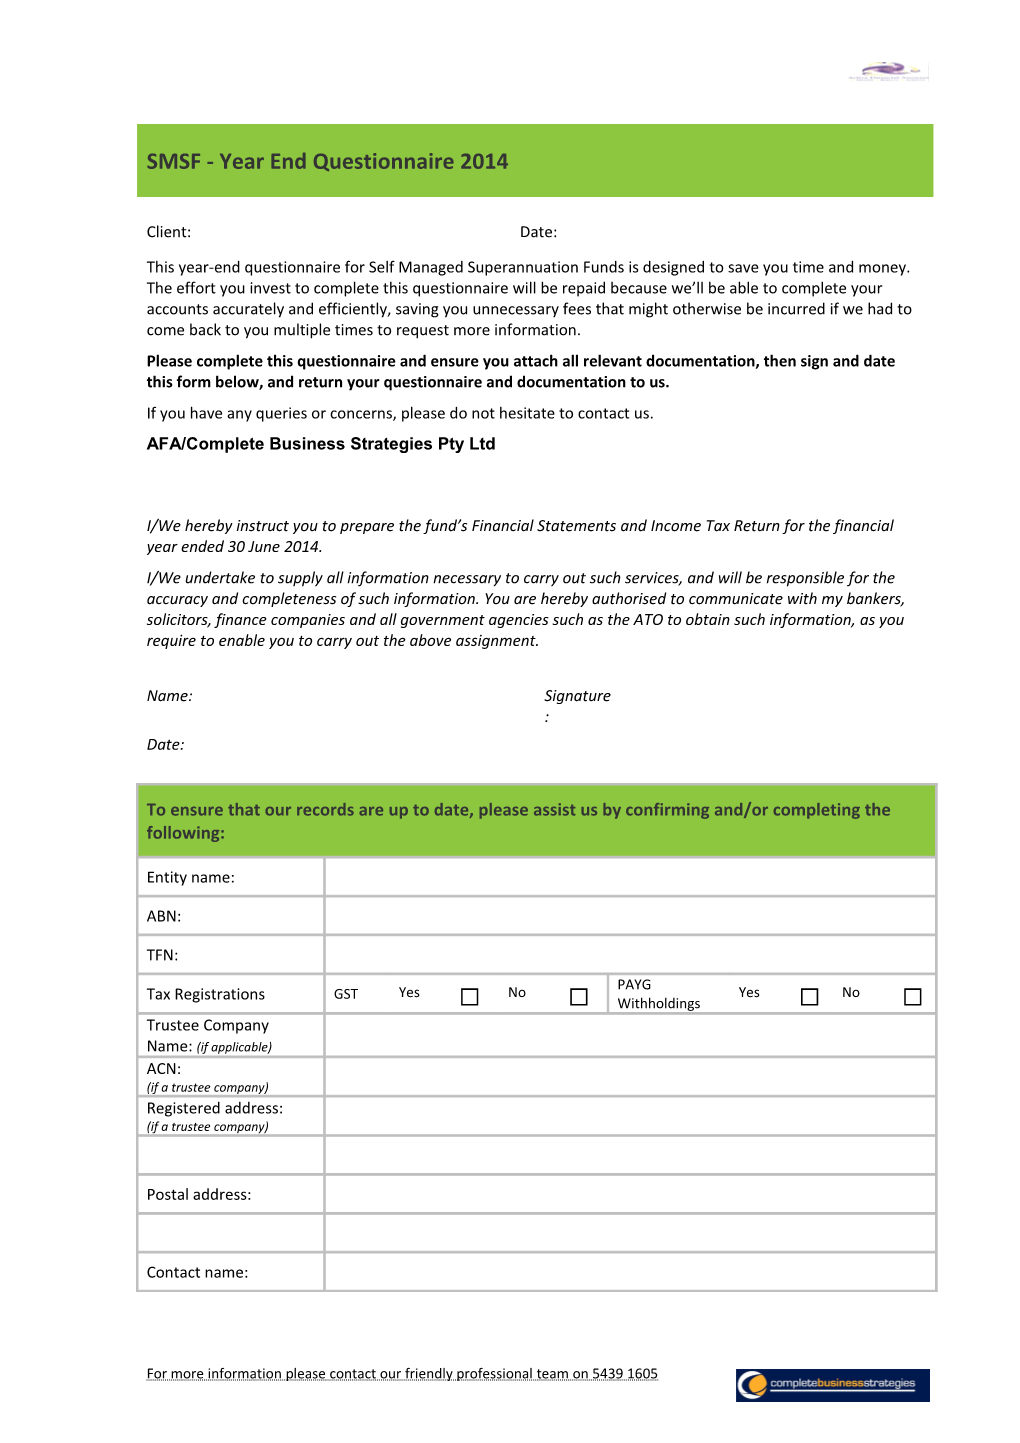 SMSF - Year End Questionnaire 2013